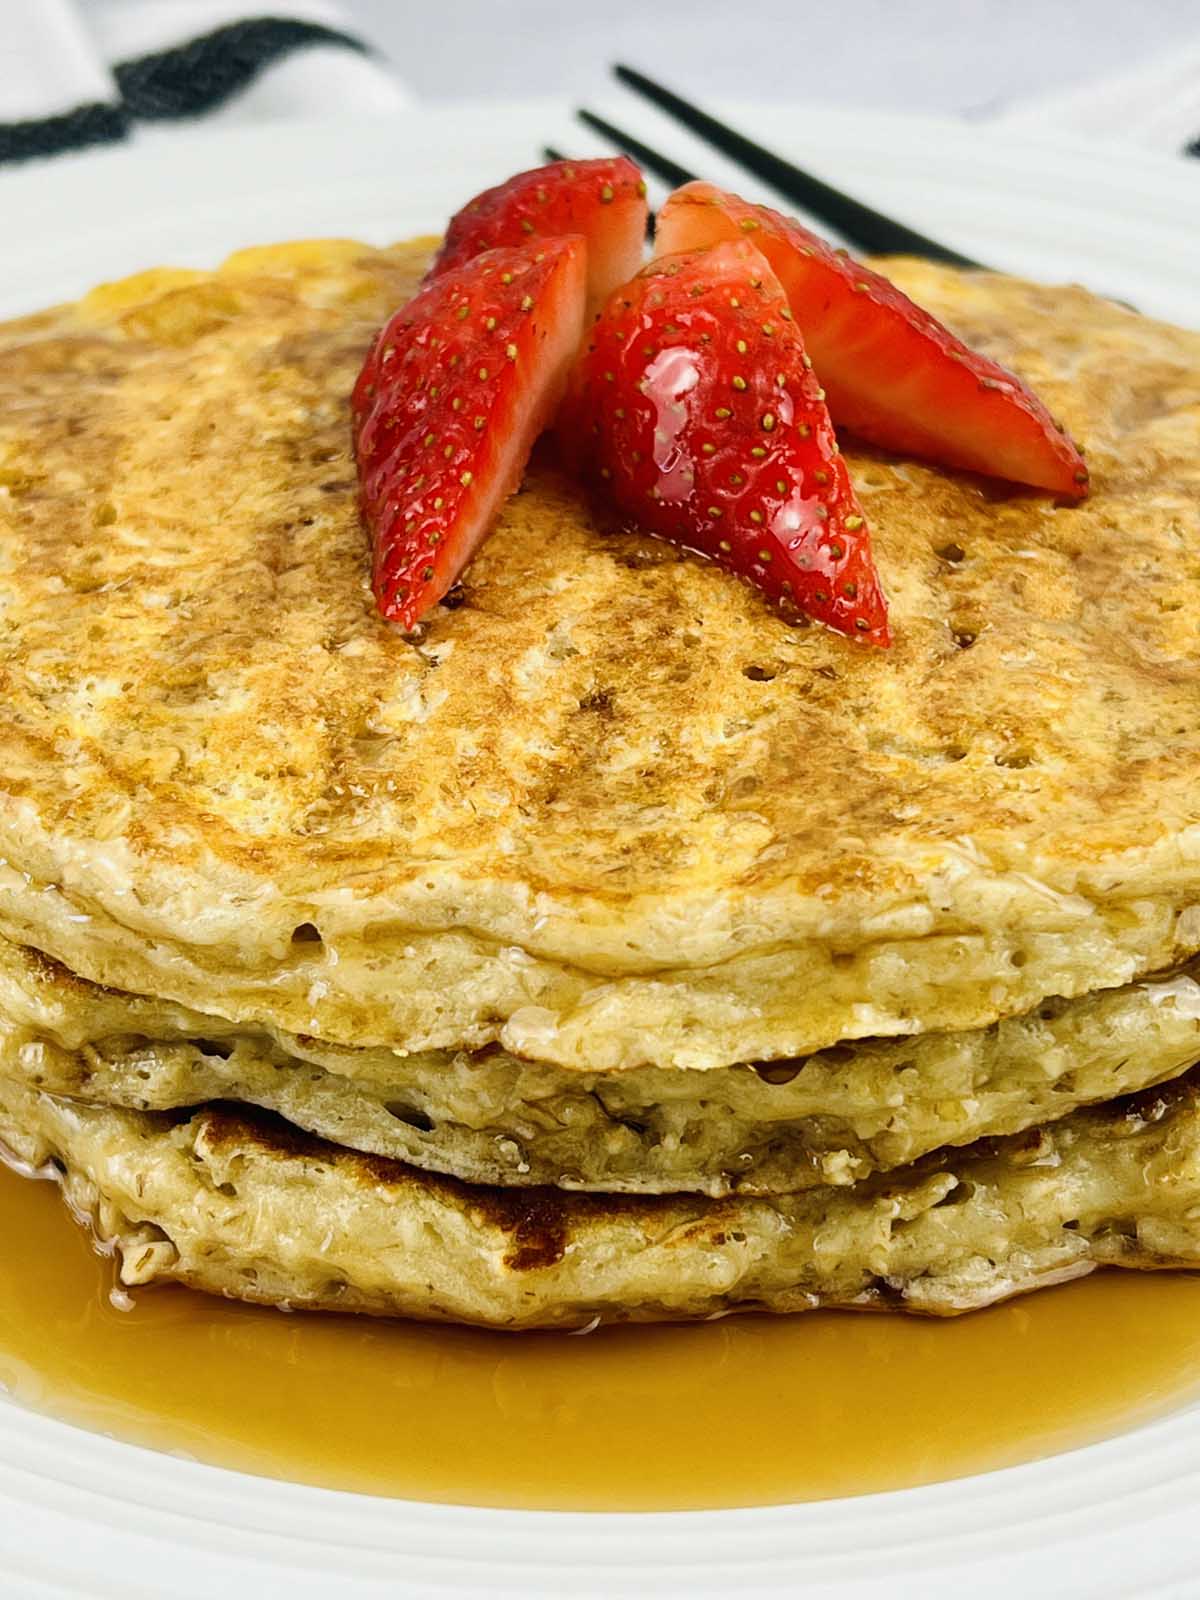 Pancakes on a plate topping with slices of strawberries.